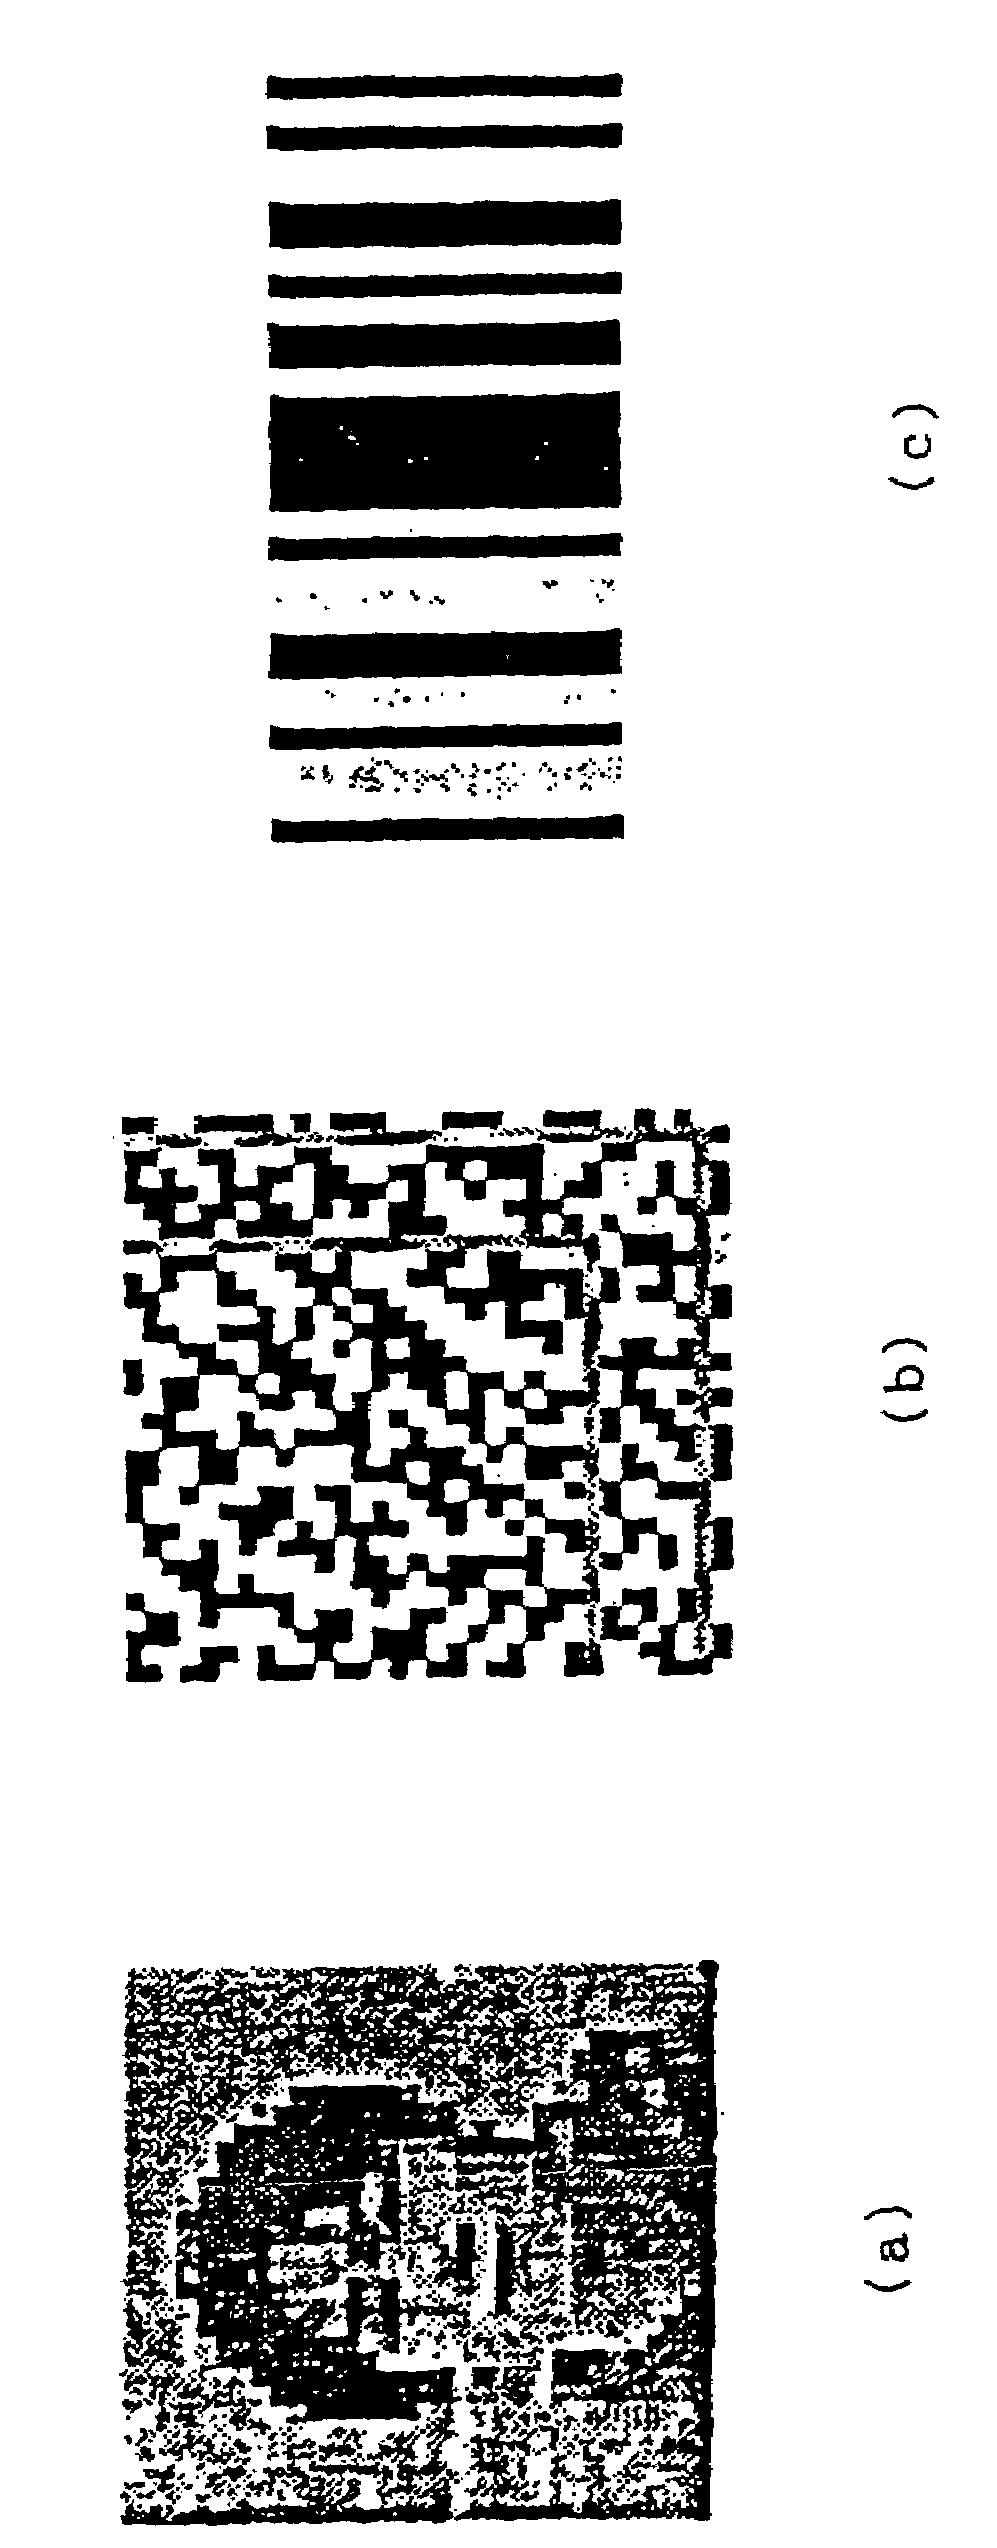 Method and apparatus for generating data representative of features of an image